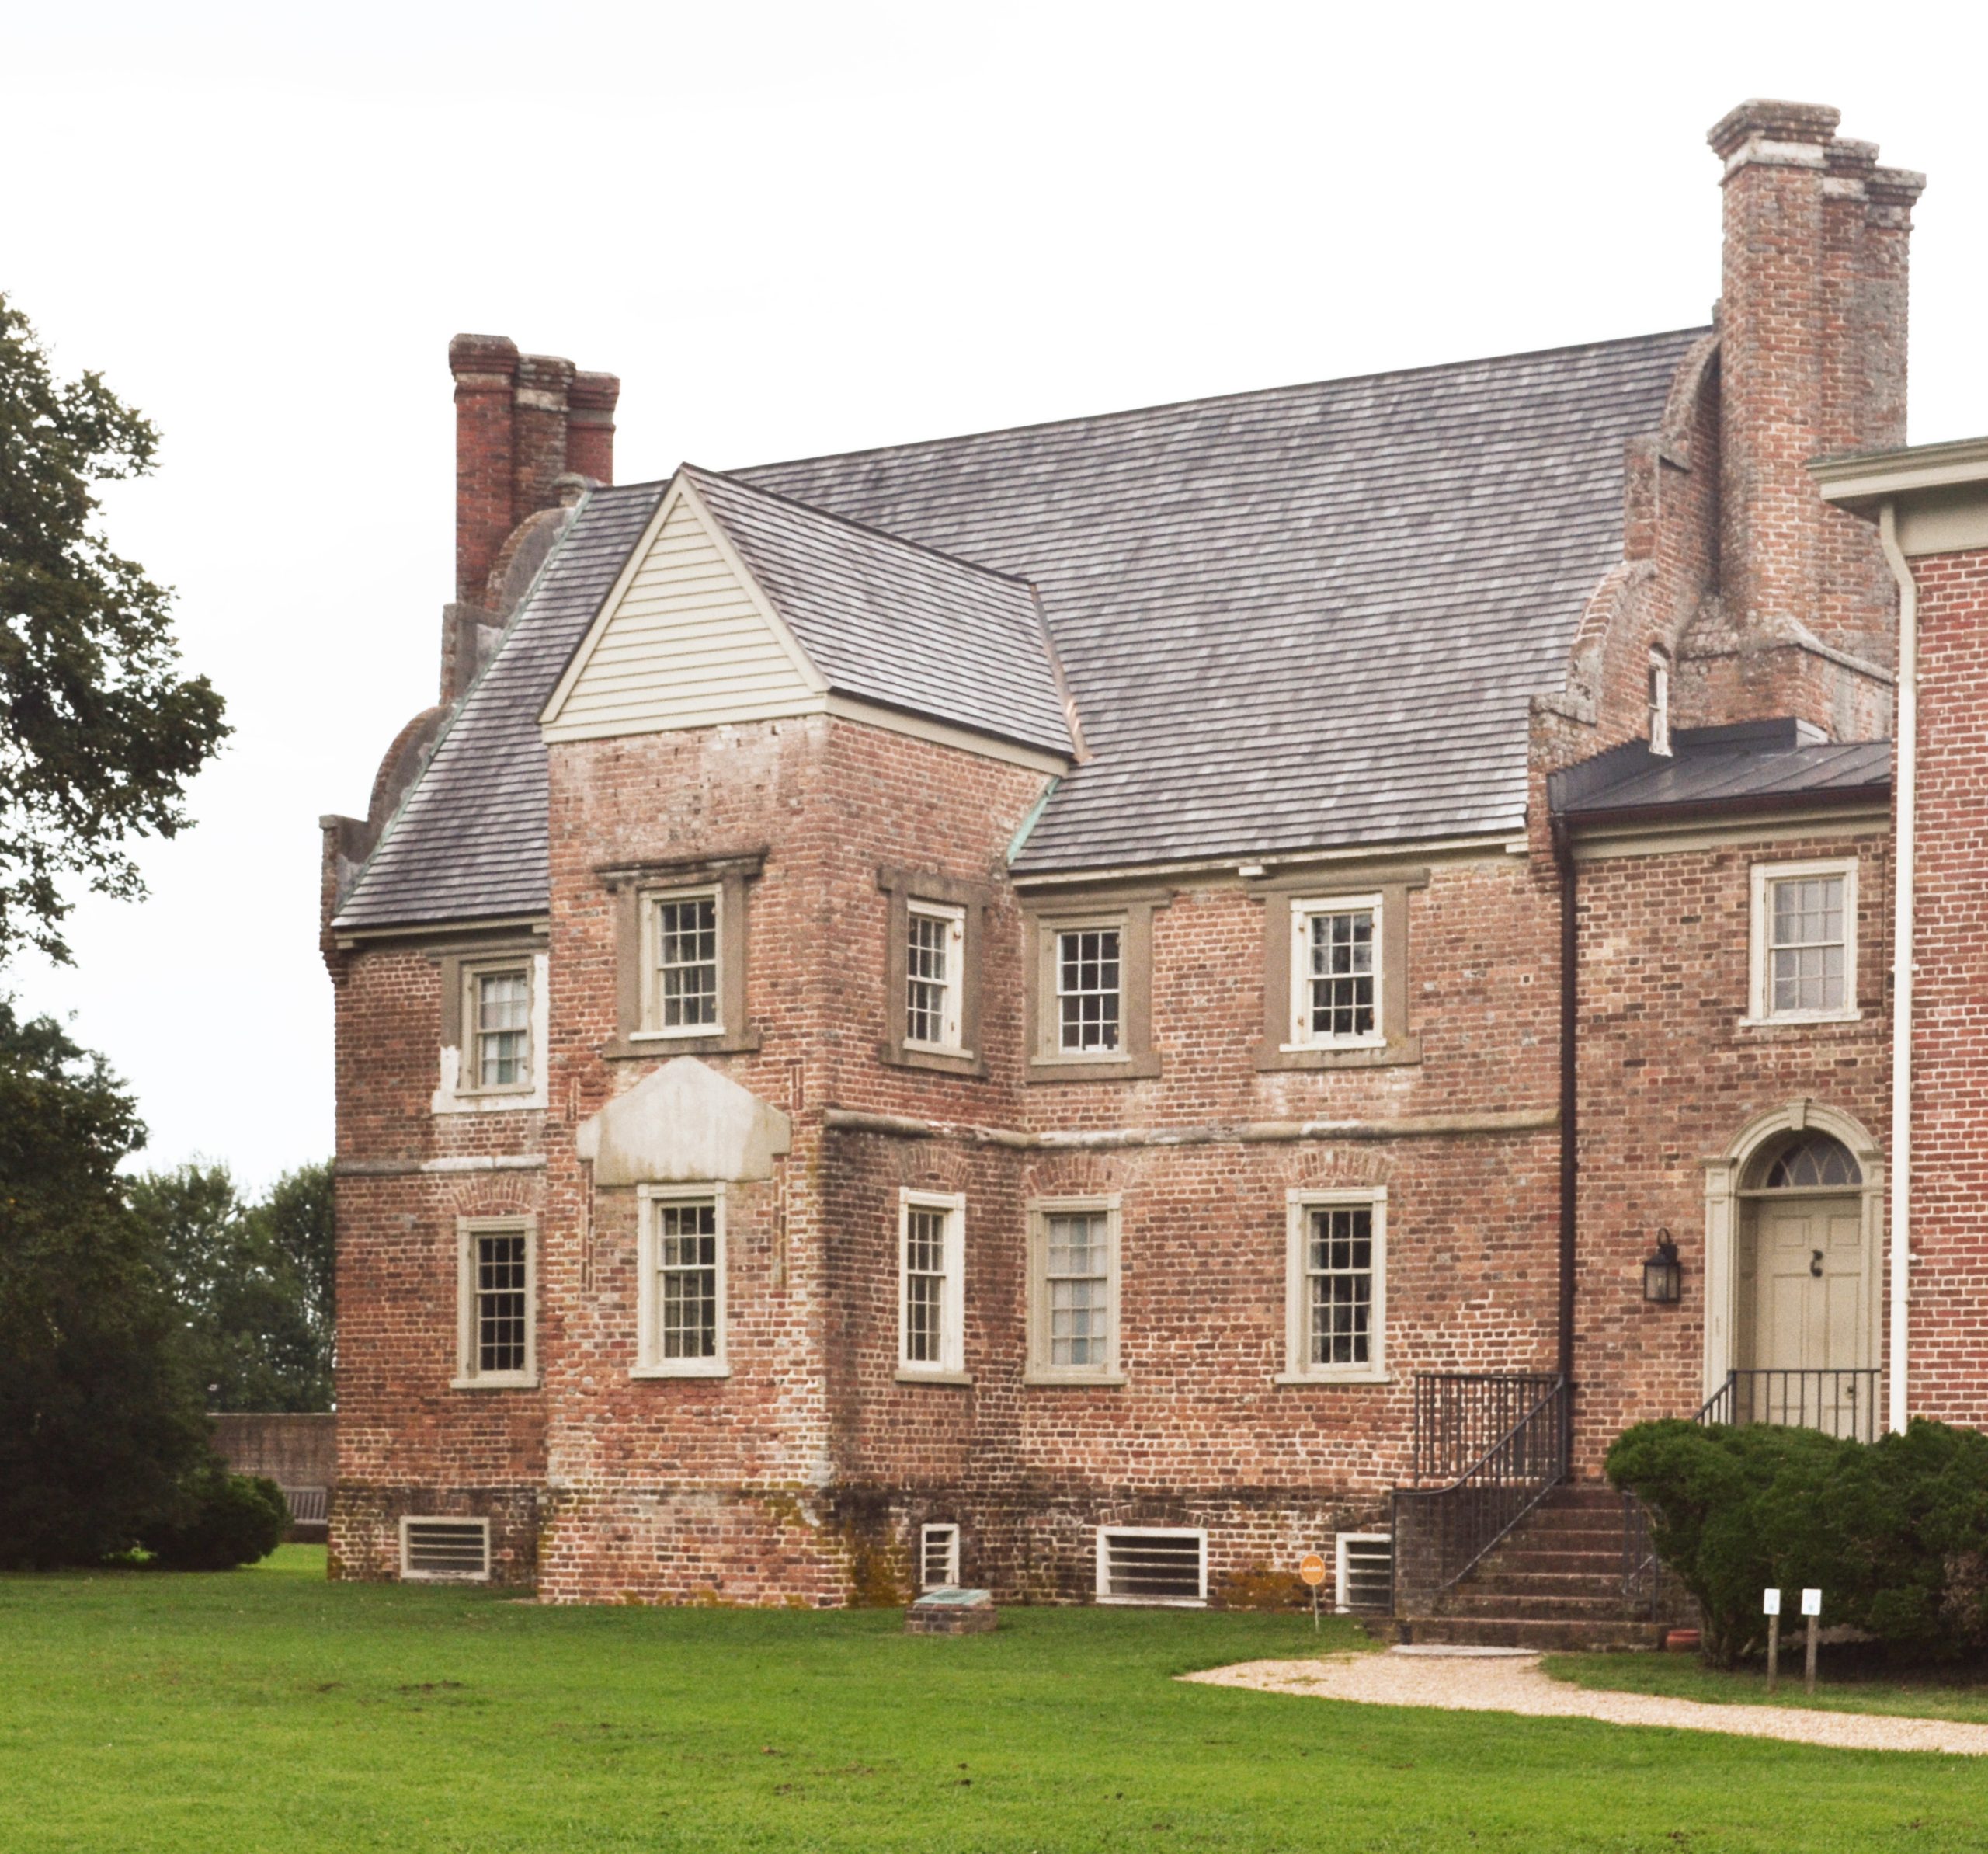 090-0001_Bacons_Castle_2019_exterior_front_facade_VLR_Online-CCL-scaled